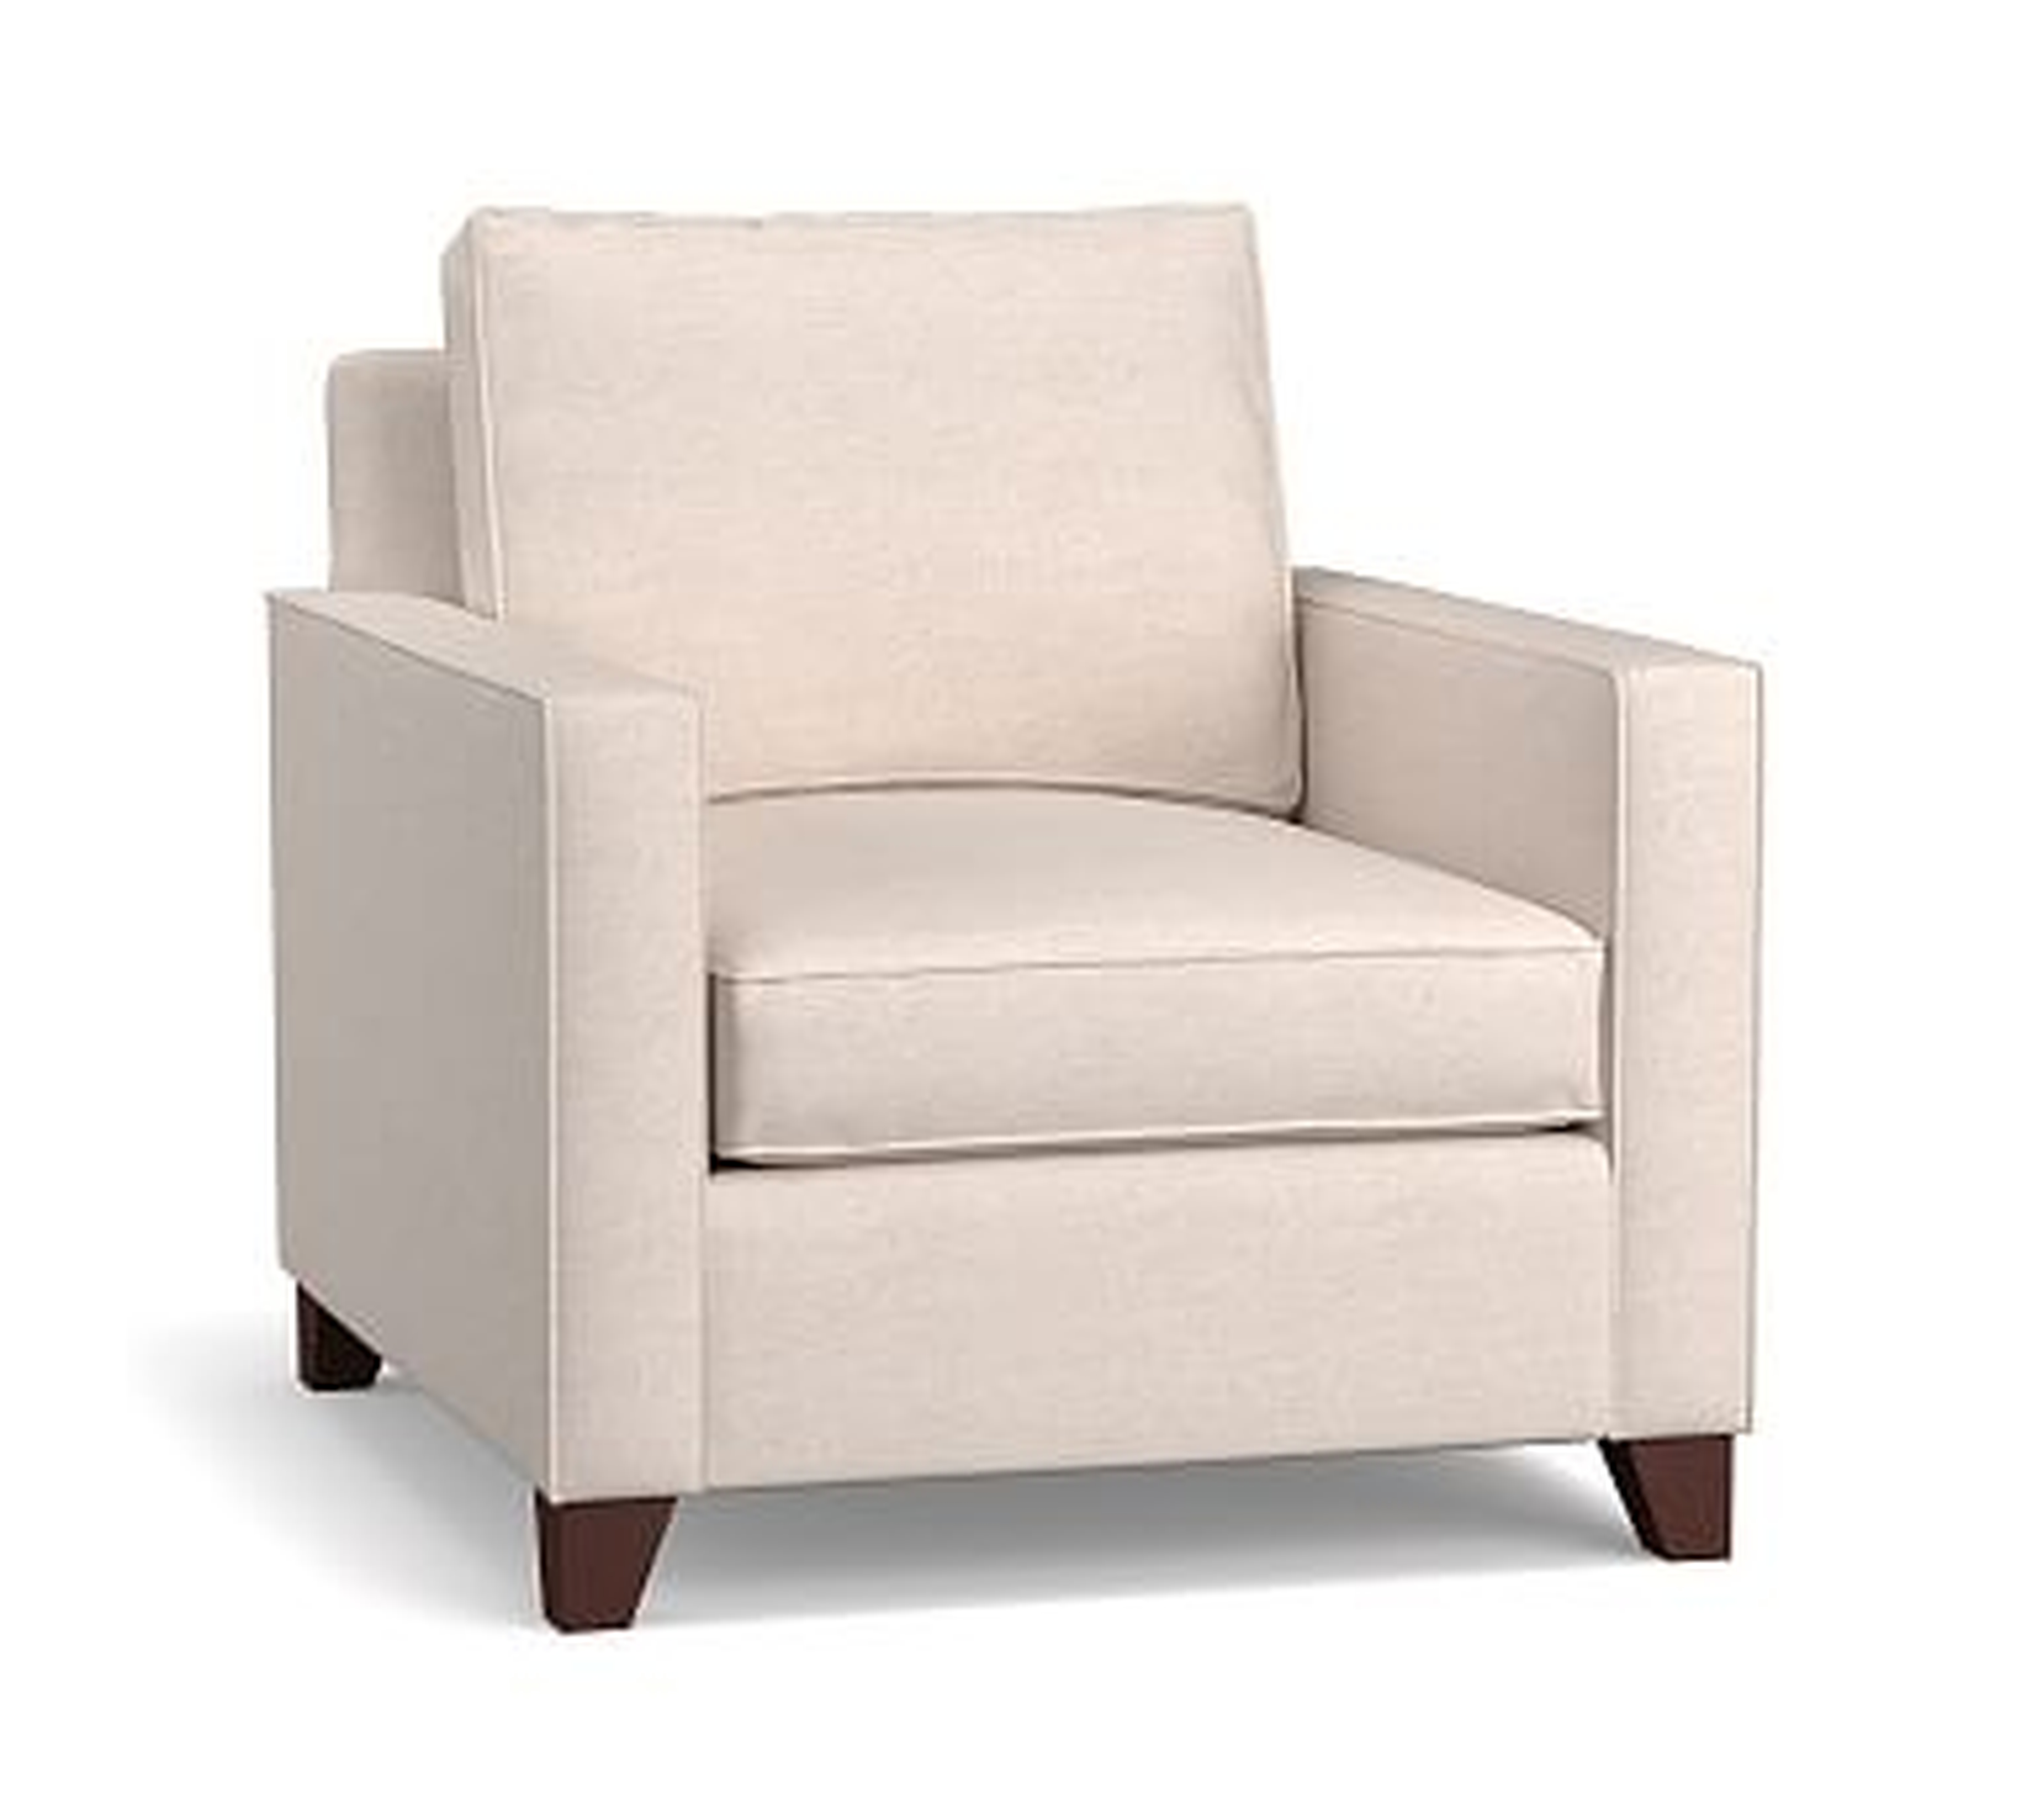 Cameron Square Arm Upholstered Deep Seat Armchair, Polyester Wrapped Cushions, Twill Cream - Pottery Barn